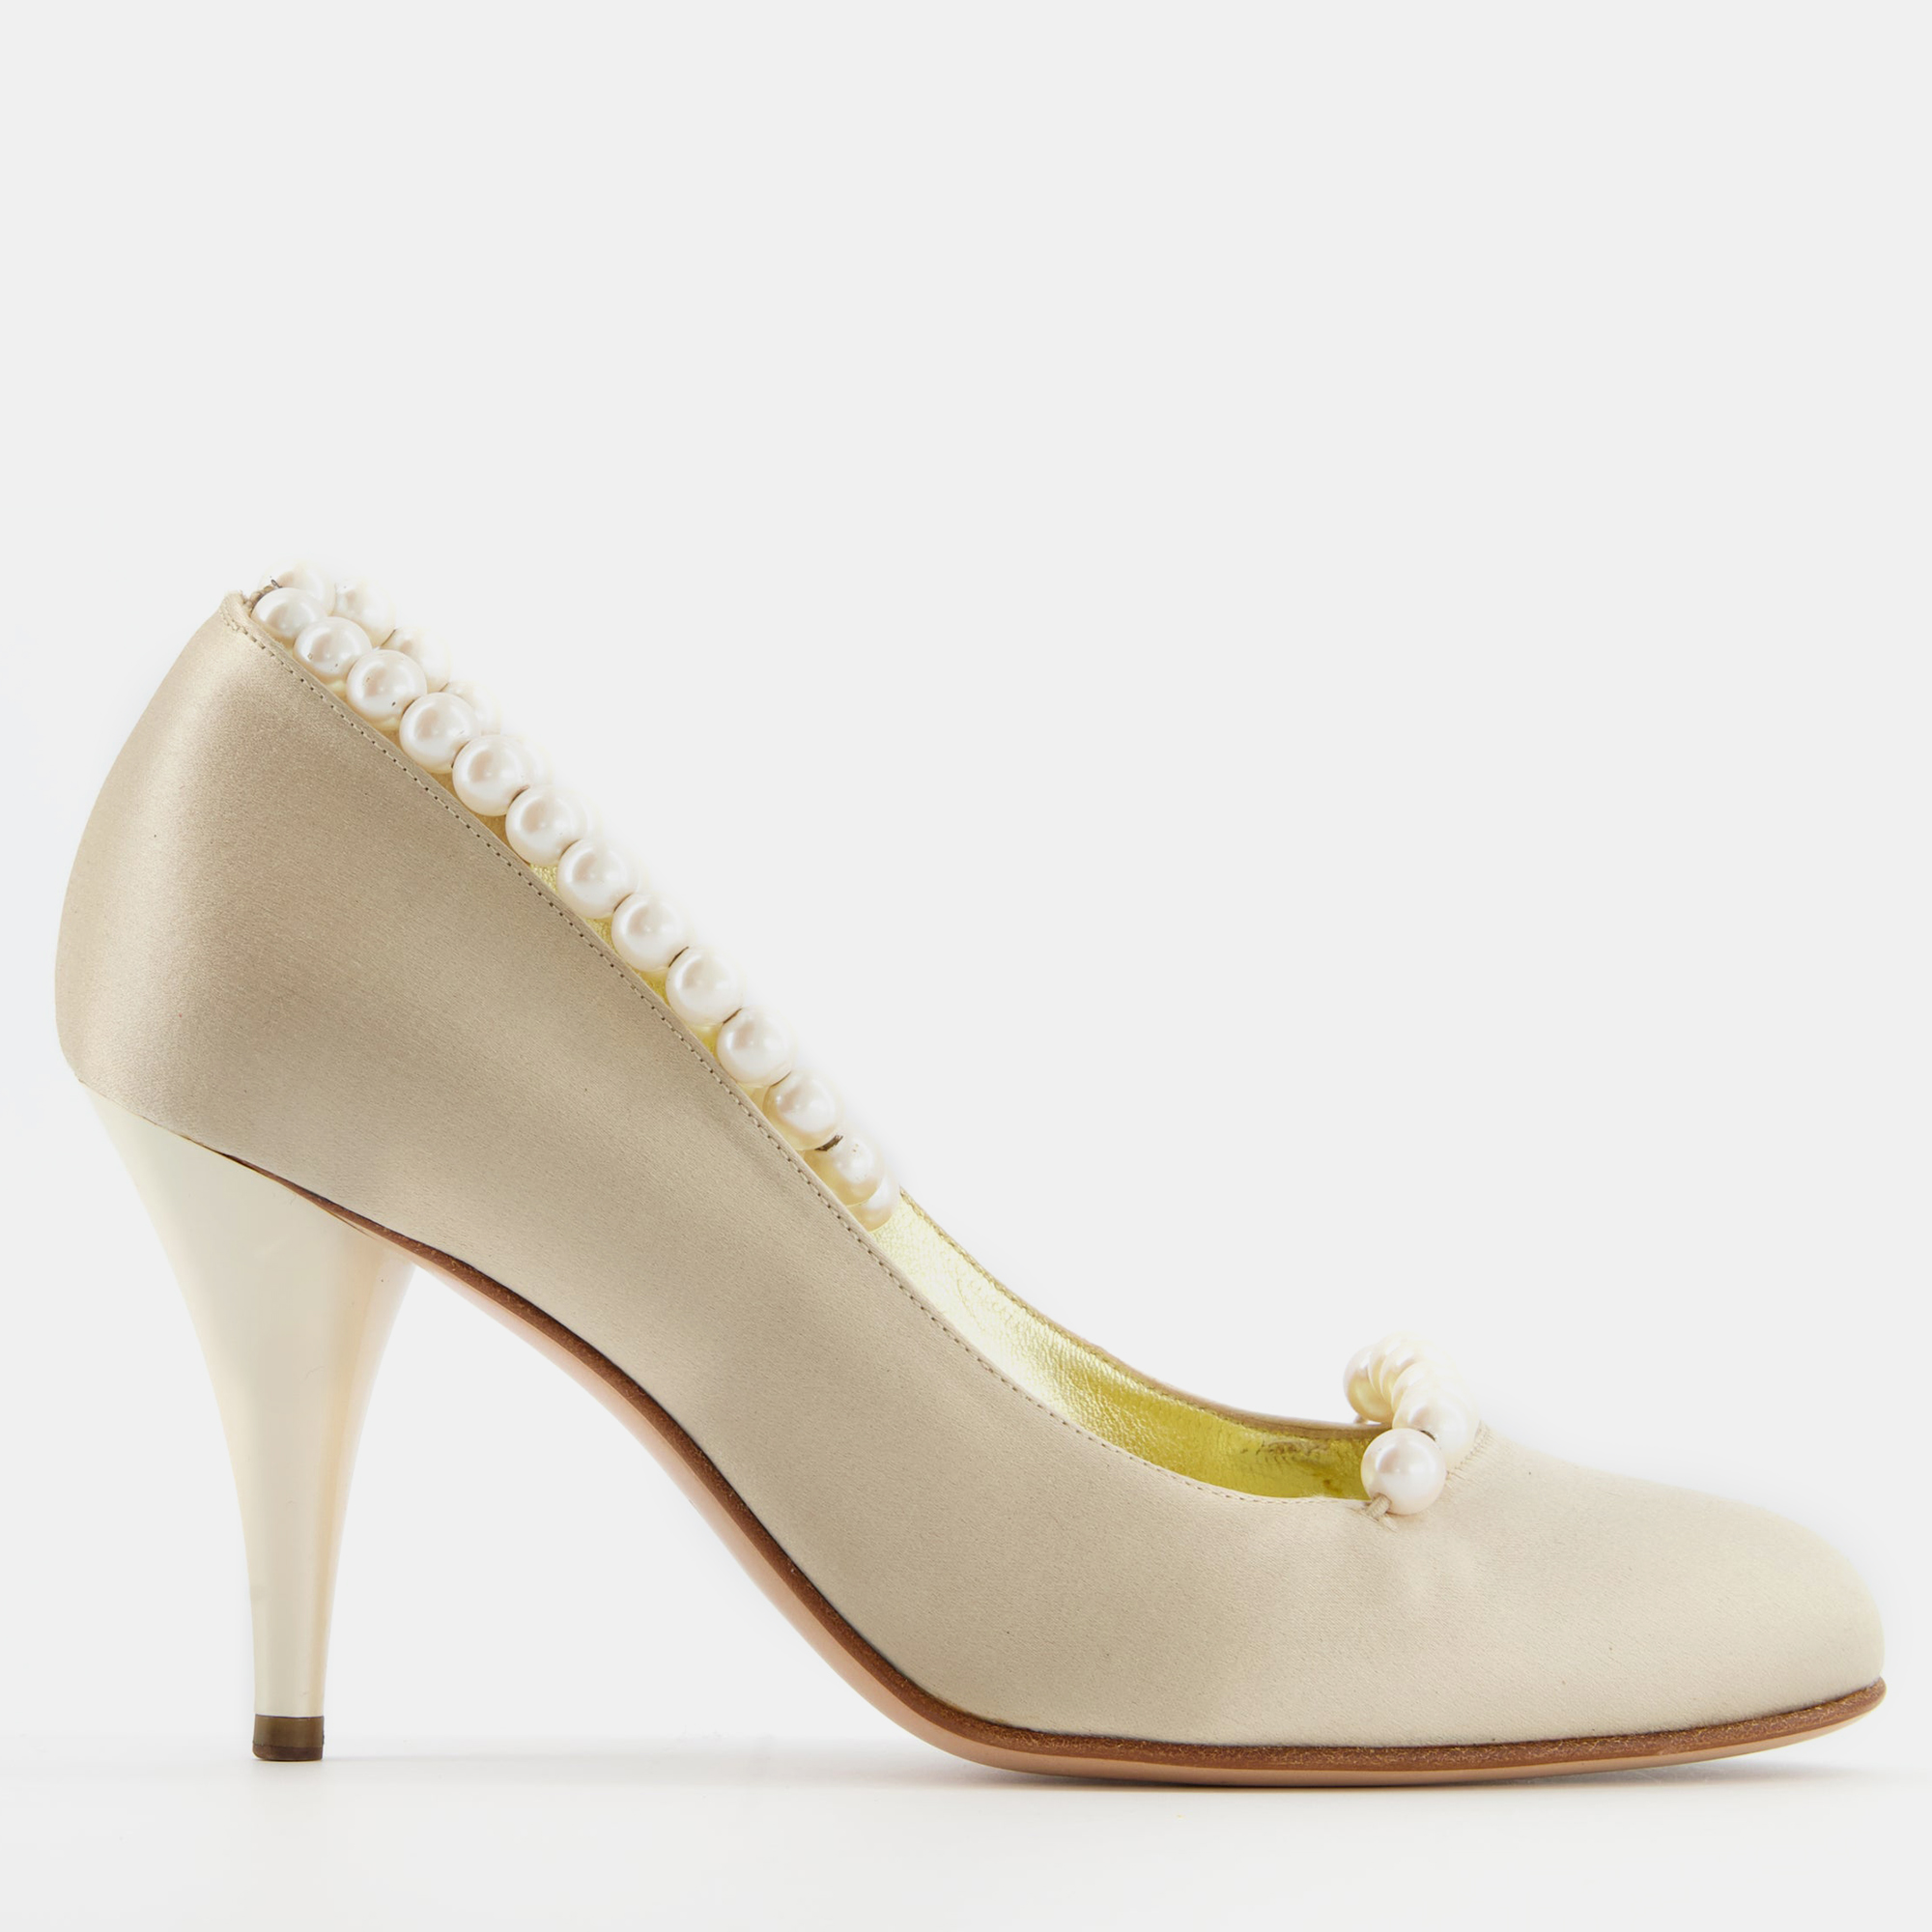 Chanel cream satin heel with pearl detail  size 37